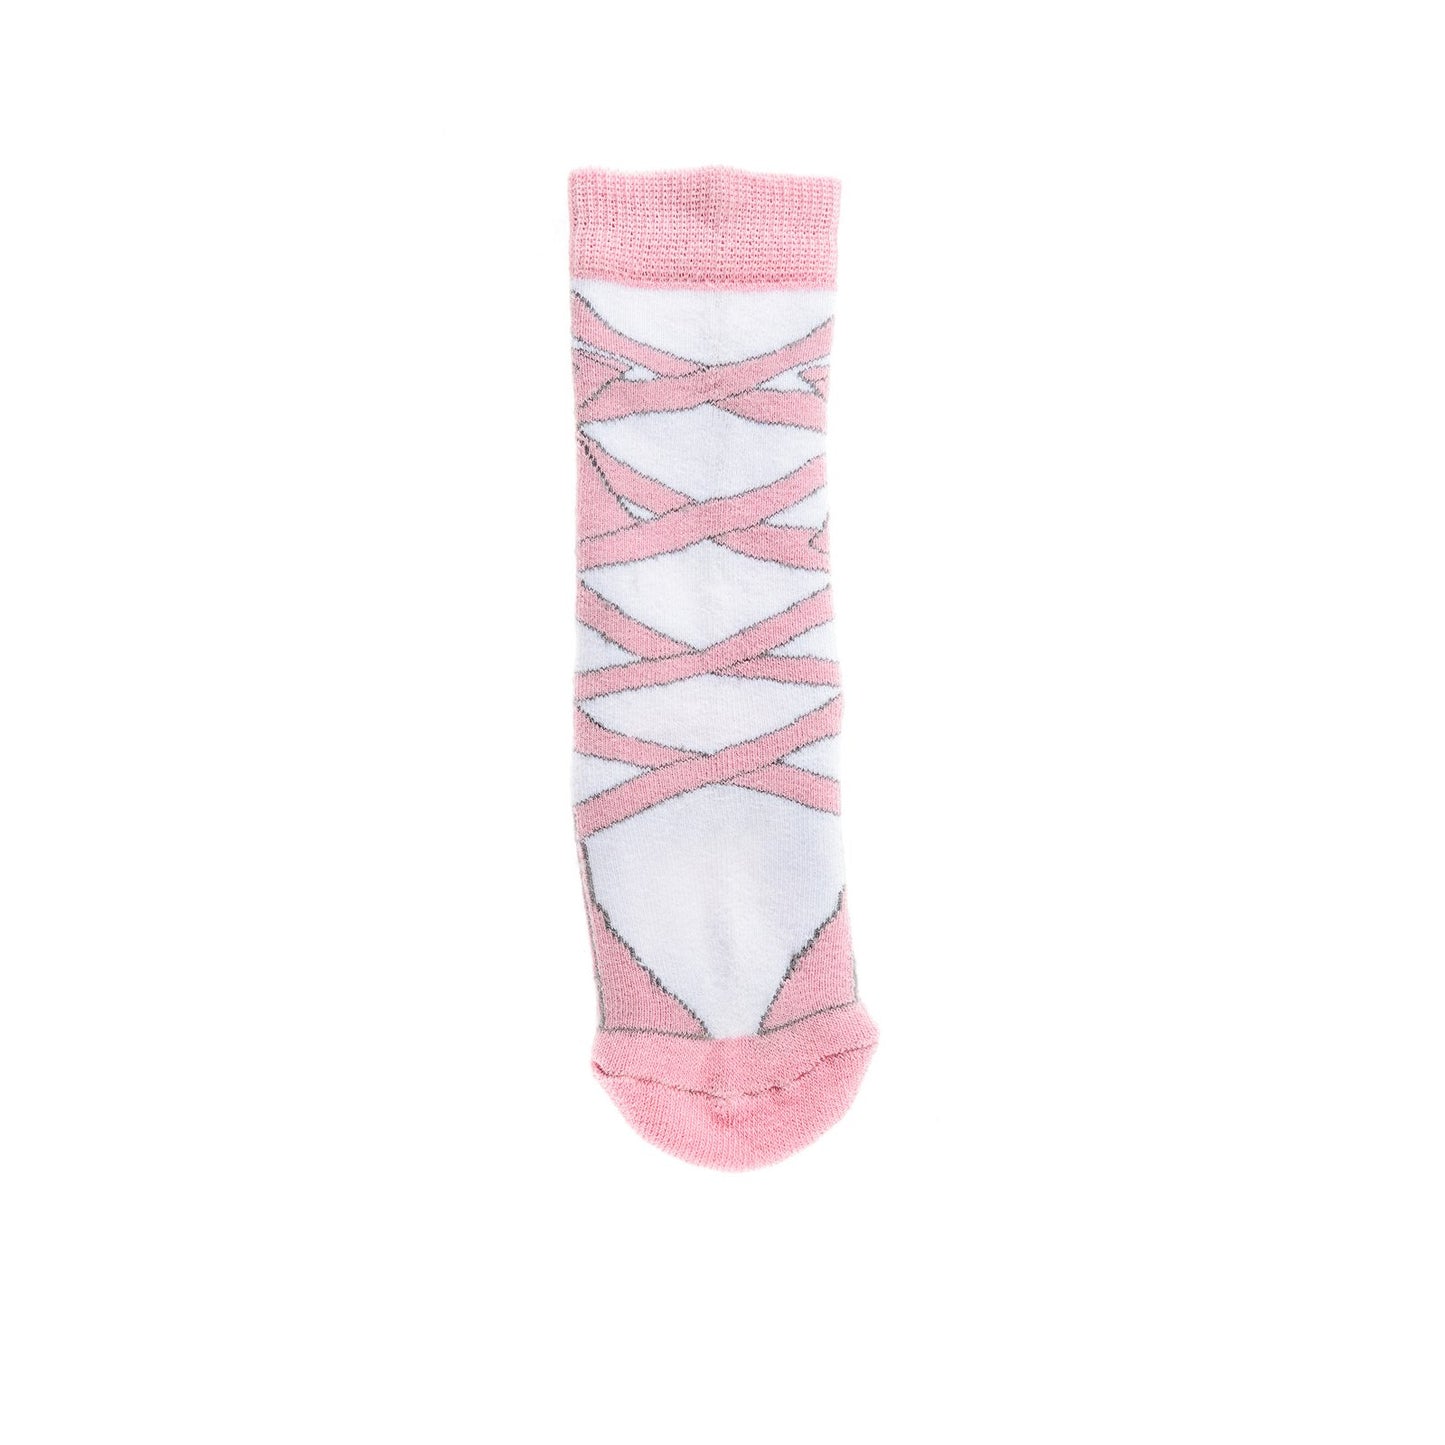 A mini sock by Squelch, style Ballerina, in white and pink. Front view